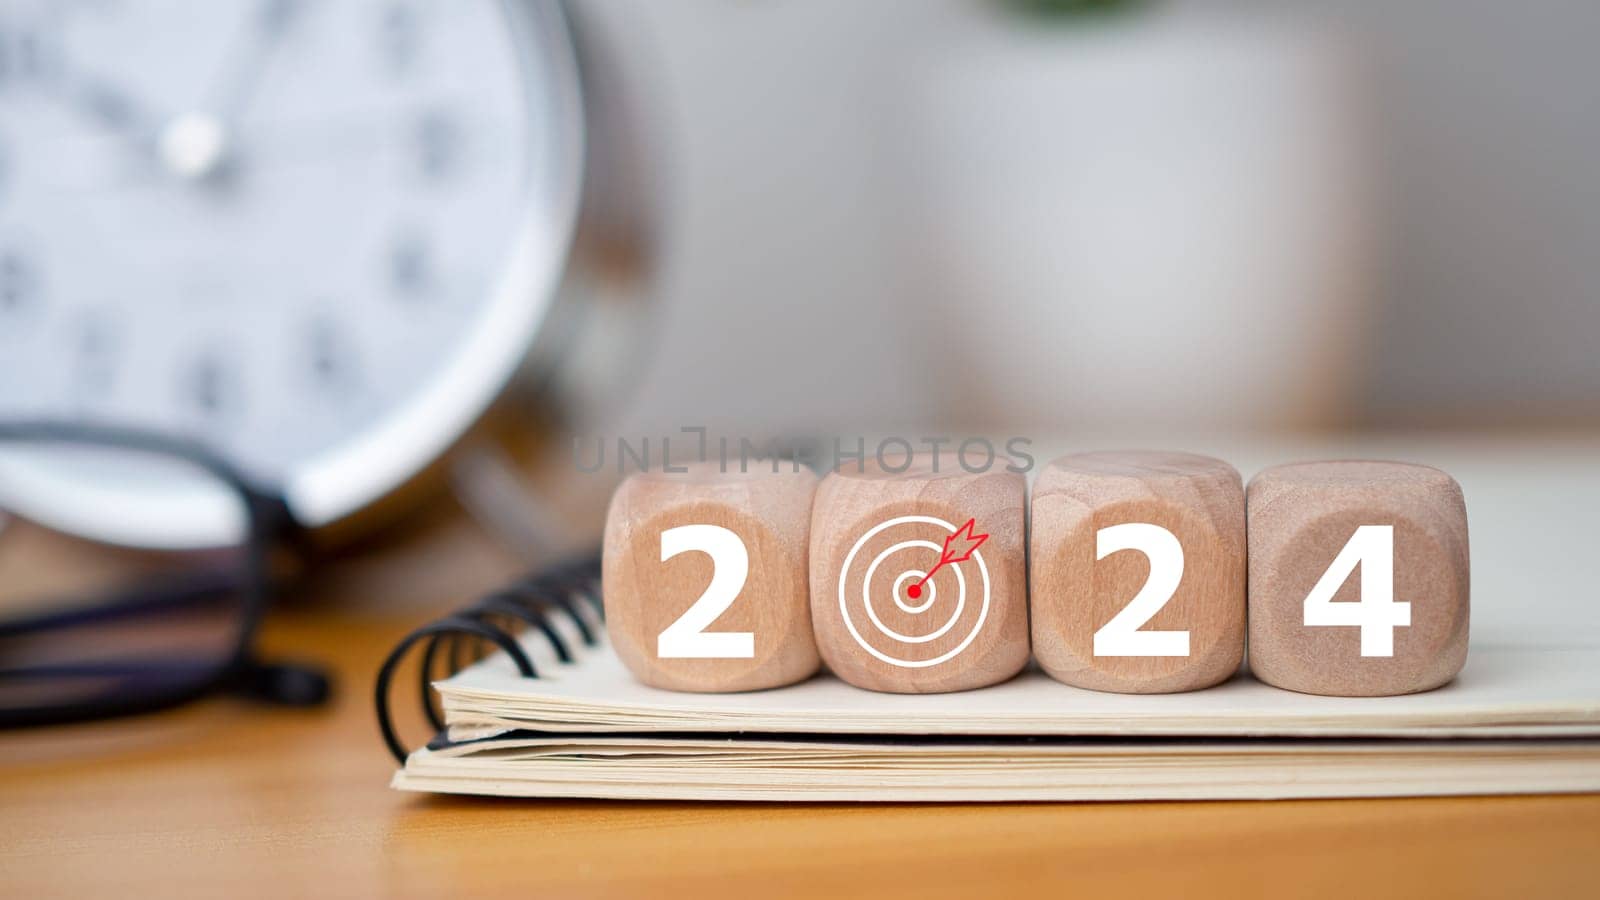 Wooden blocks with letters 2024 with calendar and alarm clock on wooden background representing the transition to 2024, Business Startup plan, The countdown begins to 2024, defining the future calendar strategy. by Unimages2527